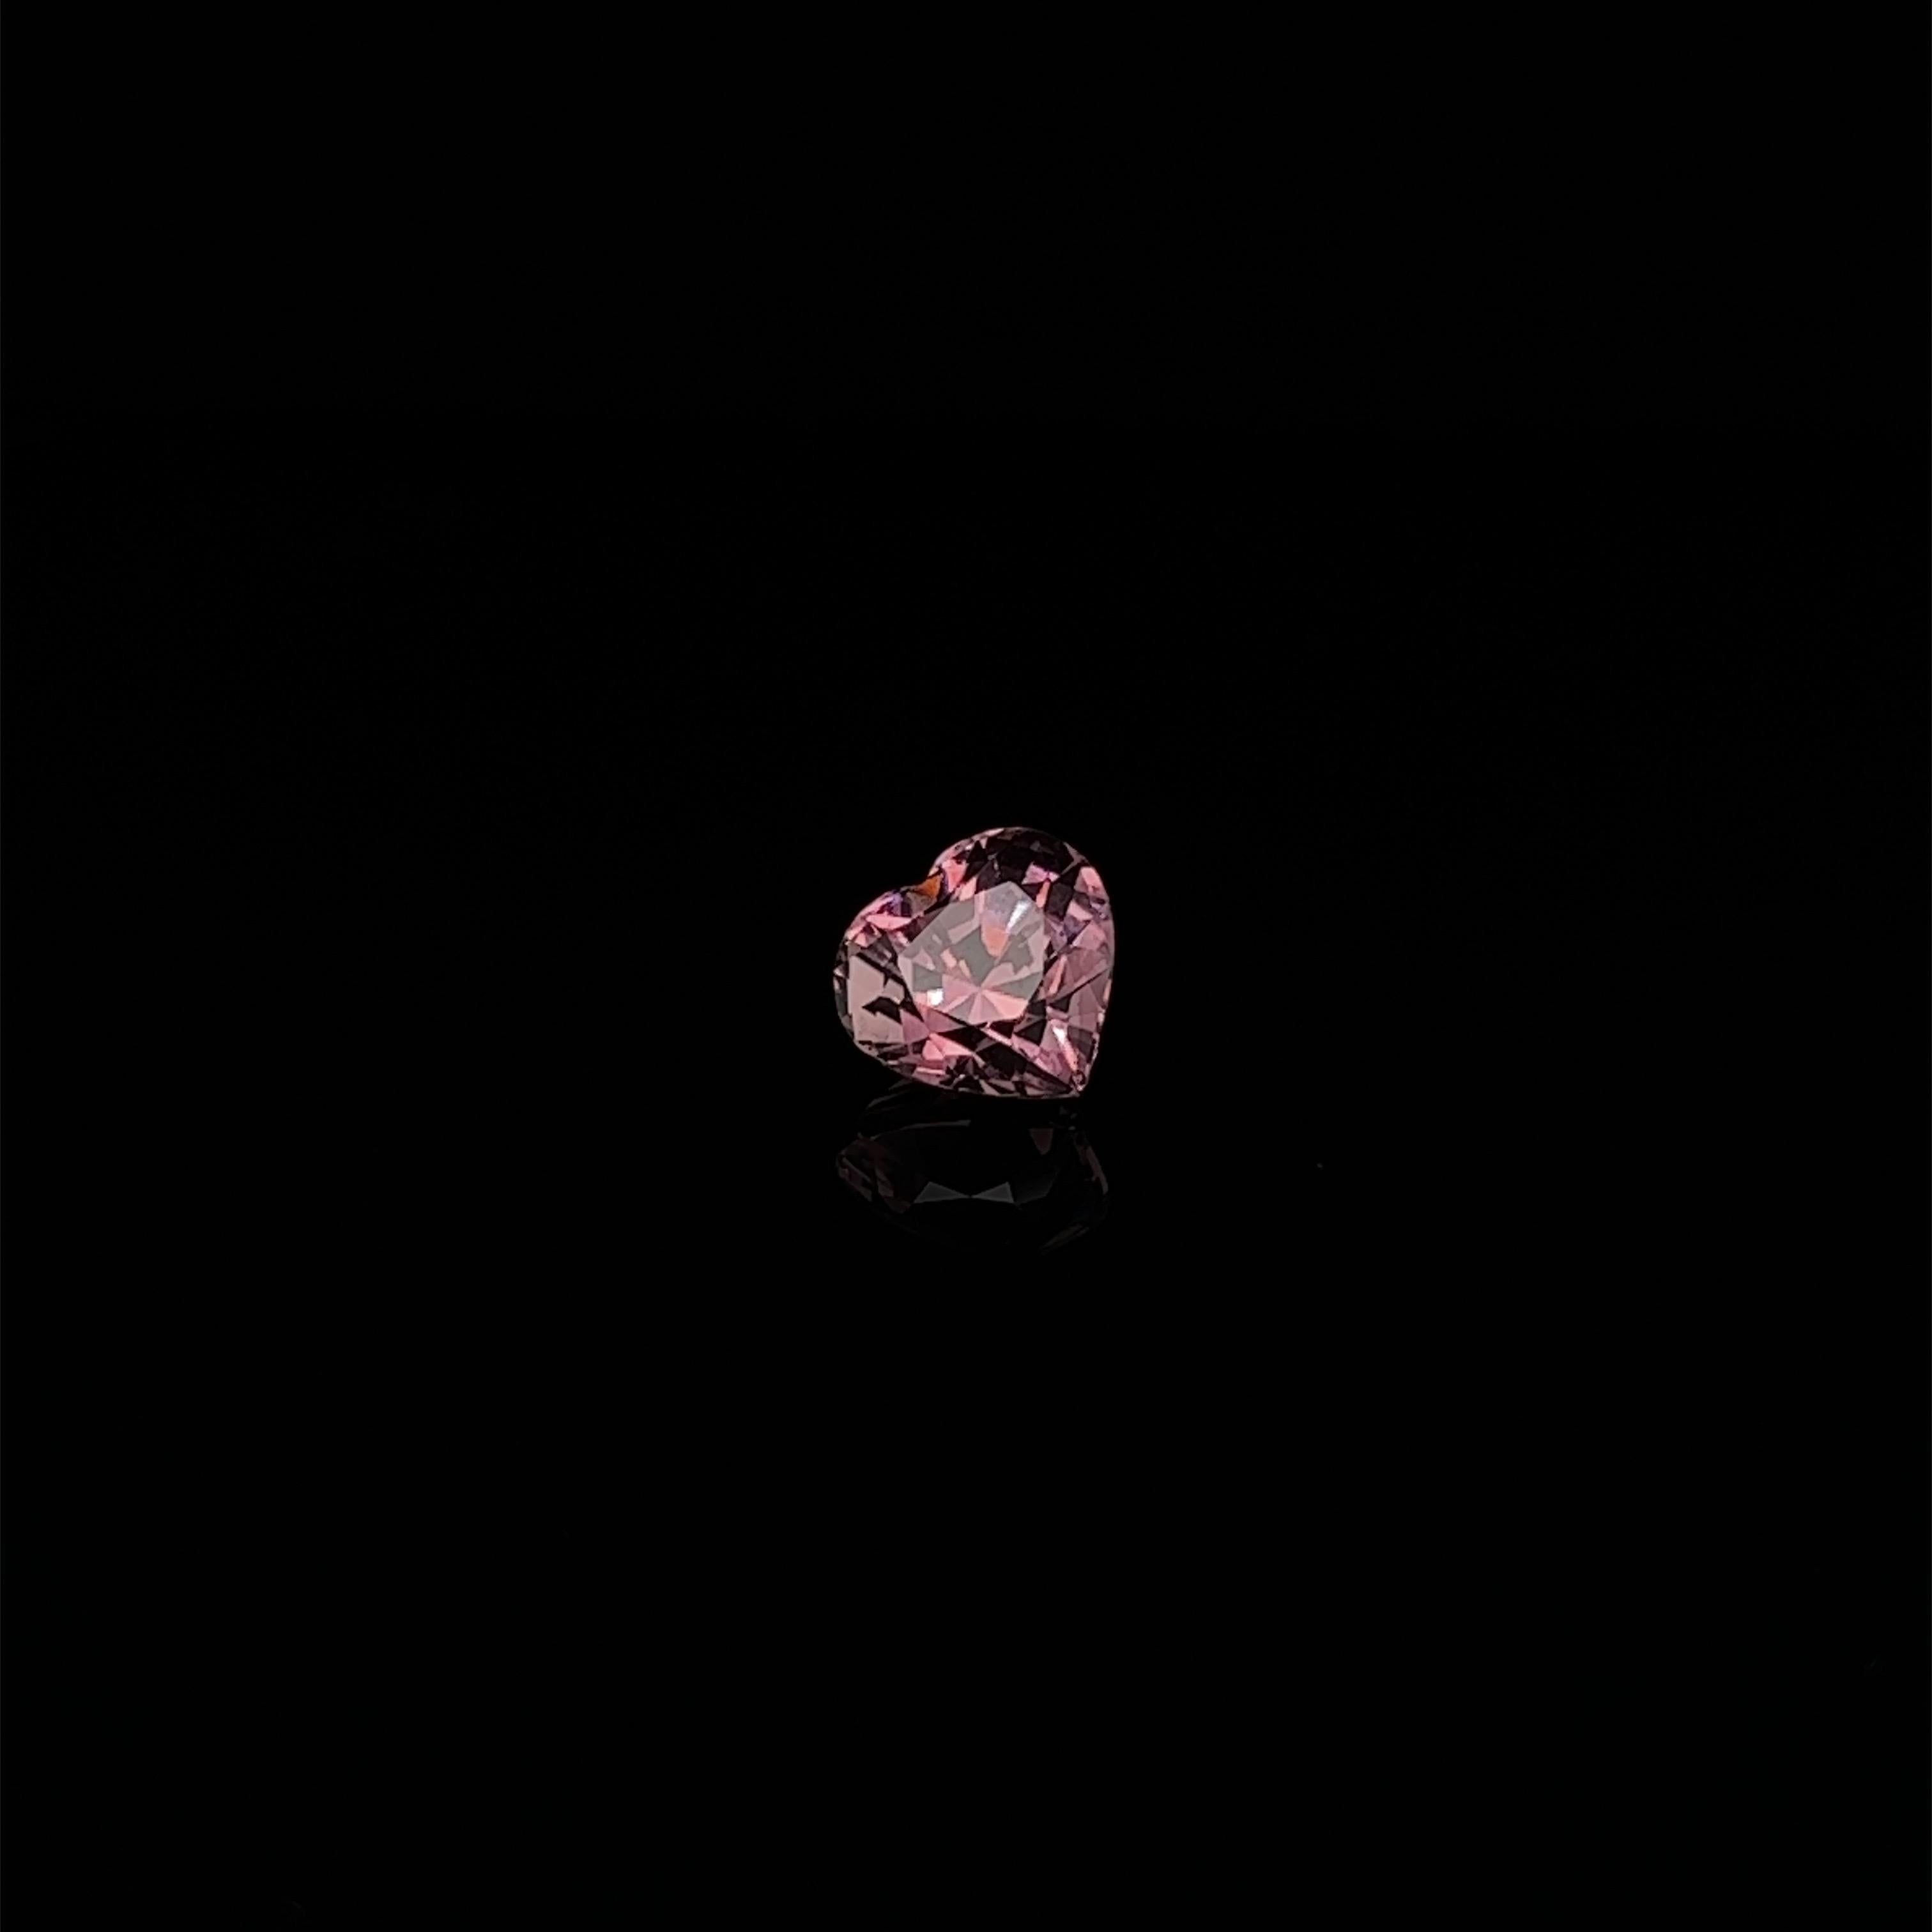 Modern Pink Heart Tourmaline Loose Stone 2.92cts 'Many More' For Sale